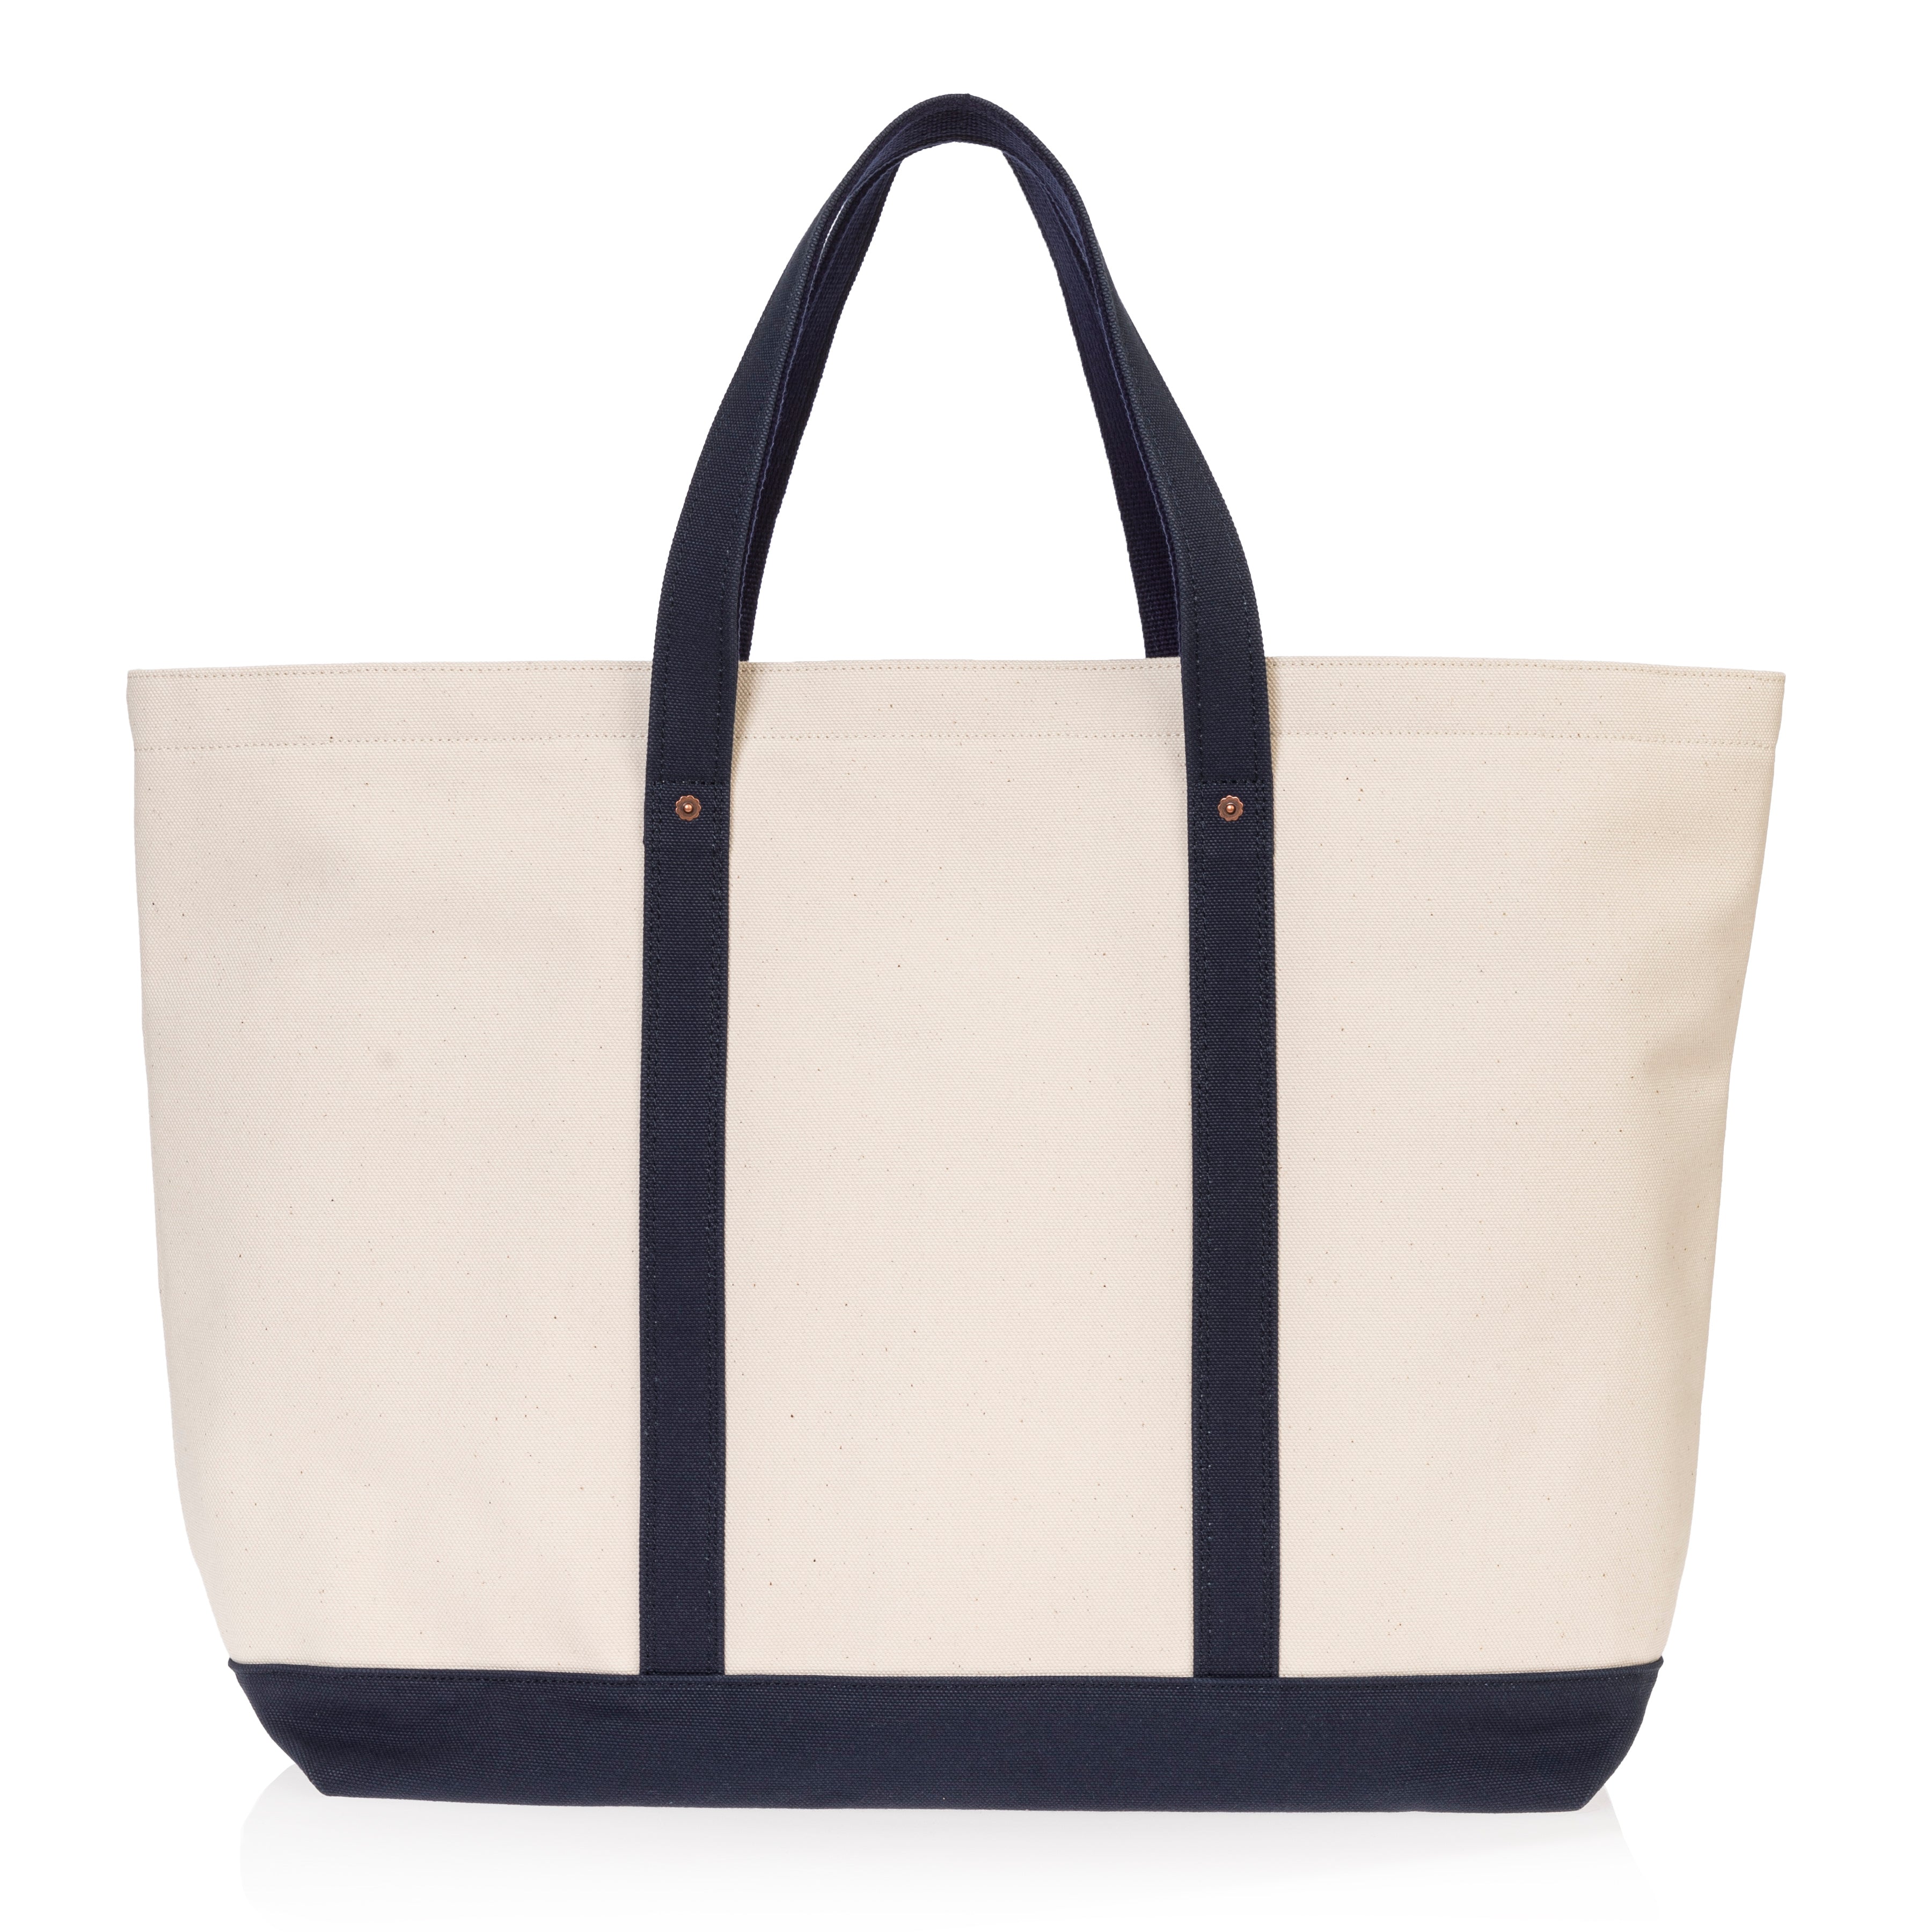 Japan Todi's 40th Anniversary Spring Party limited tote bag is